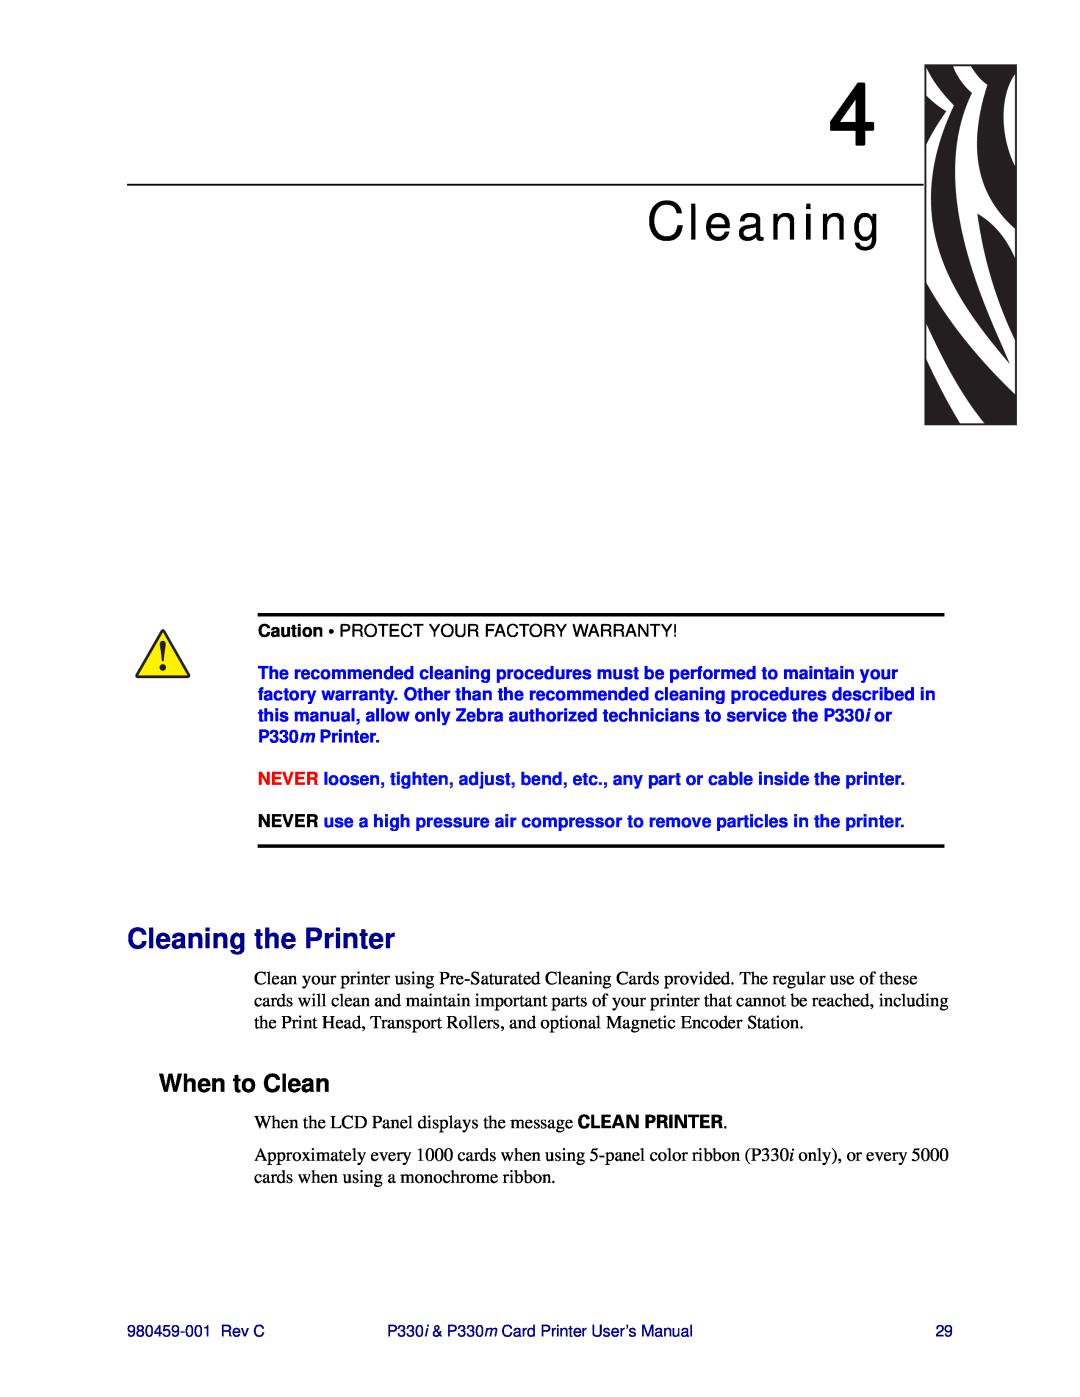 Zebra Technologies P330m, P330i user manual Cleaning the Printer, When to Clean 